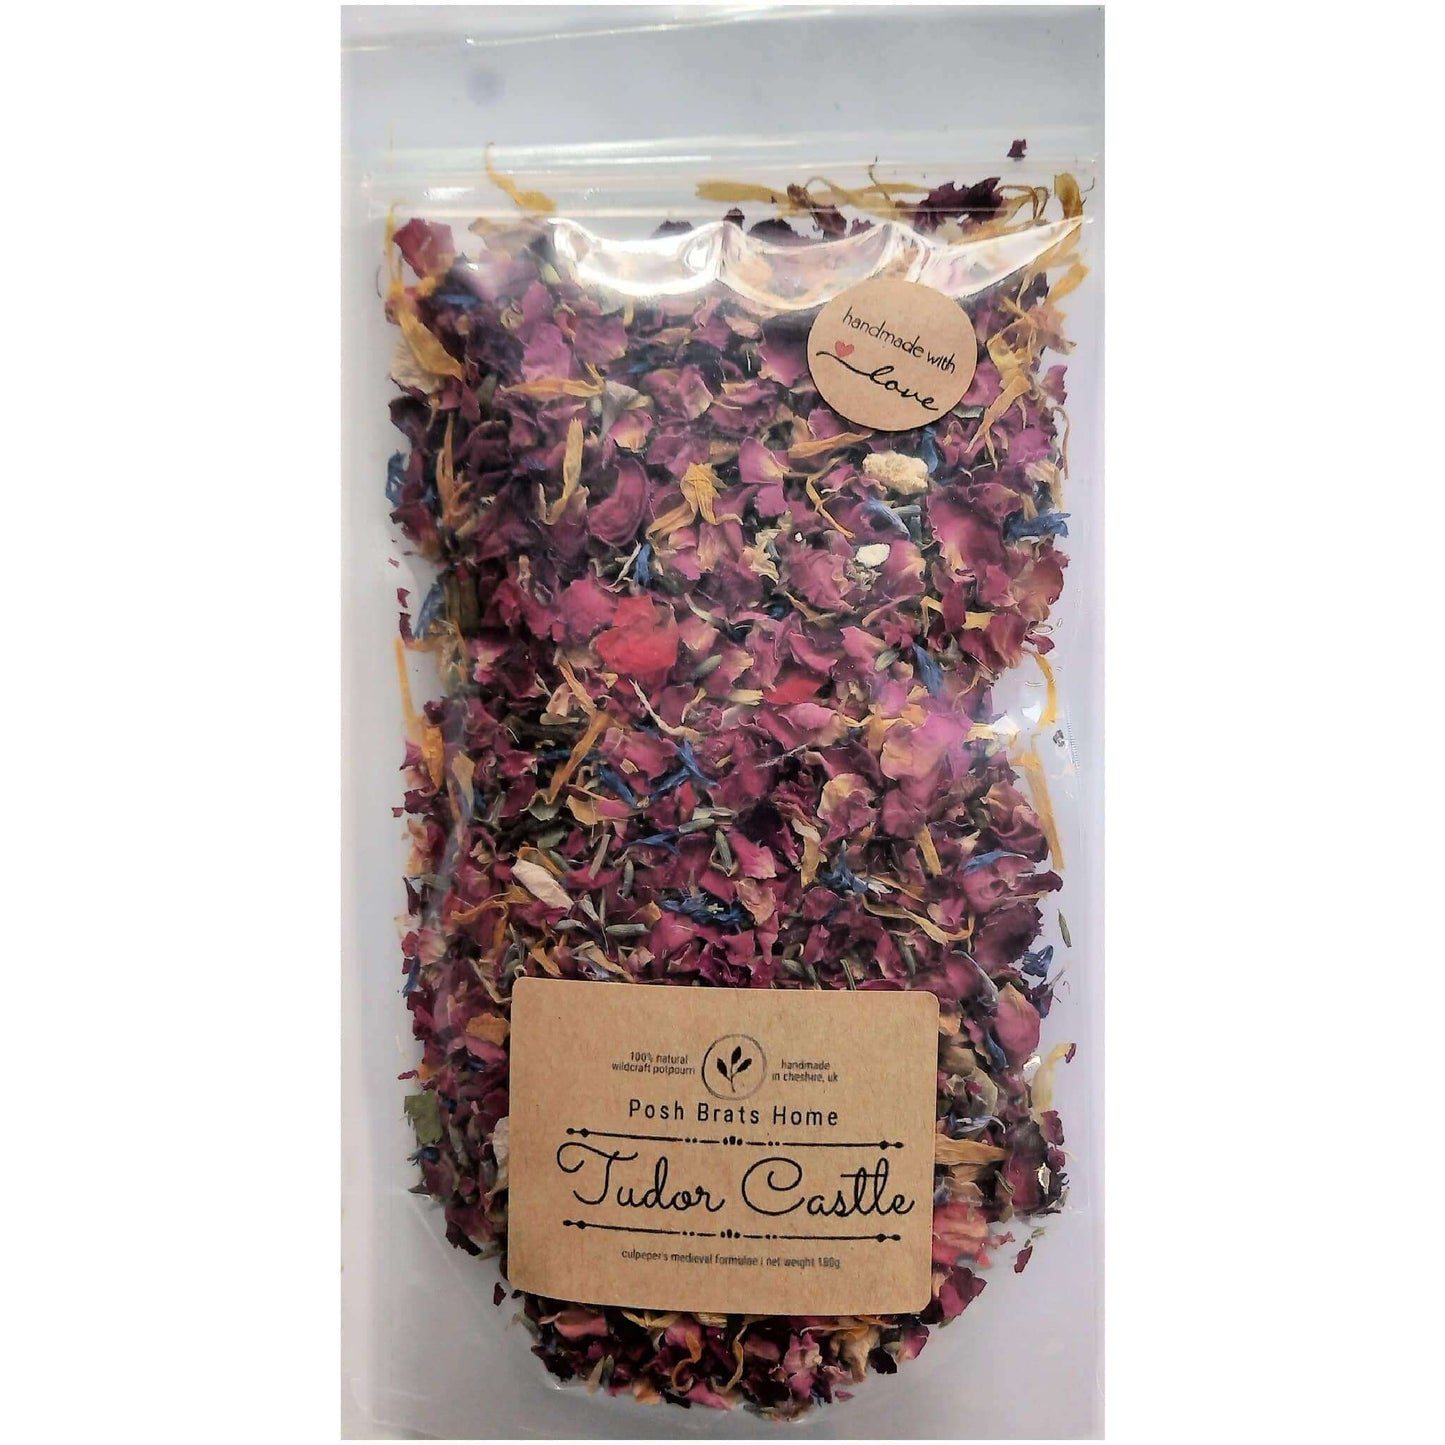 Dive into the aromatic world of potpourri with our Tudor Castle Wildcraft Medieval Botanical blend.